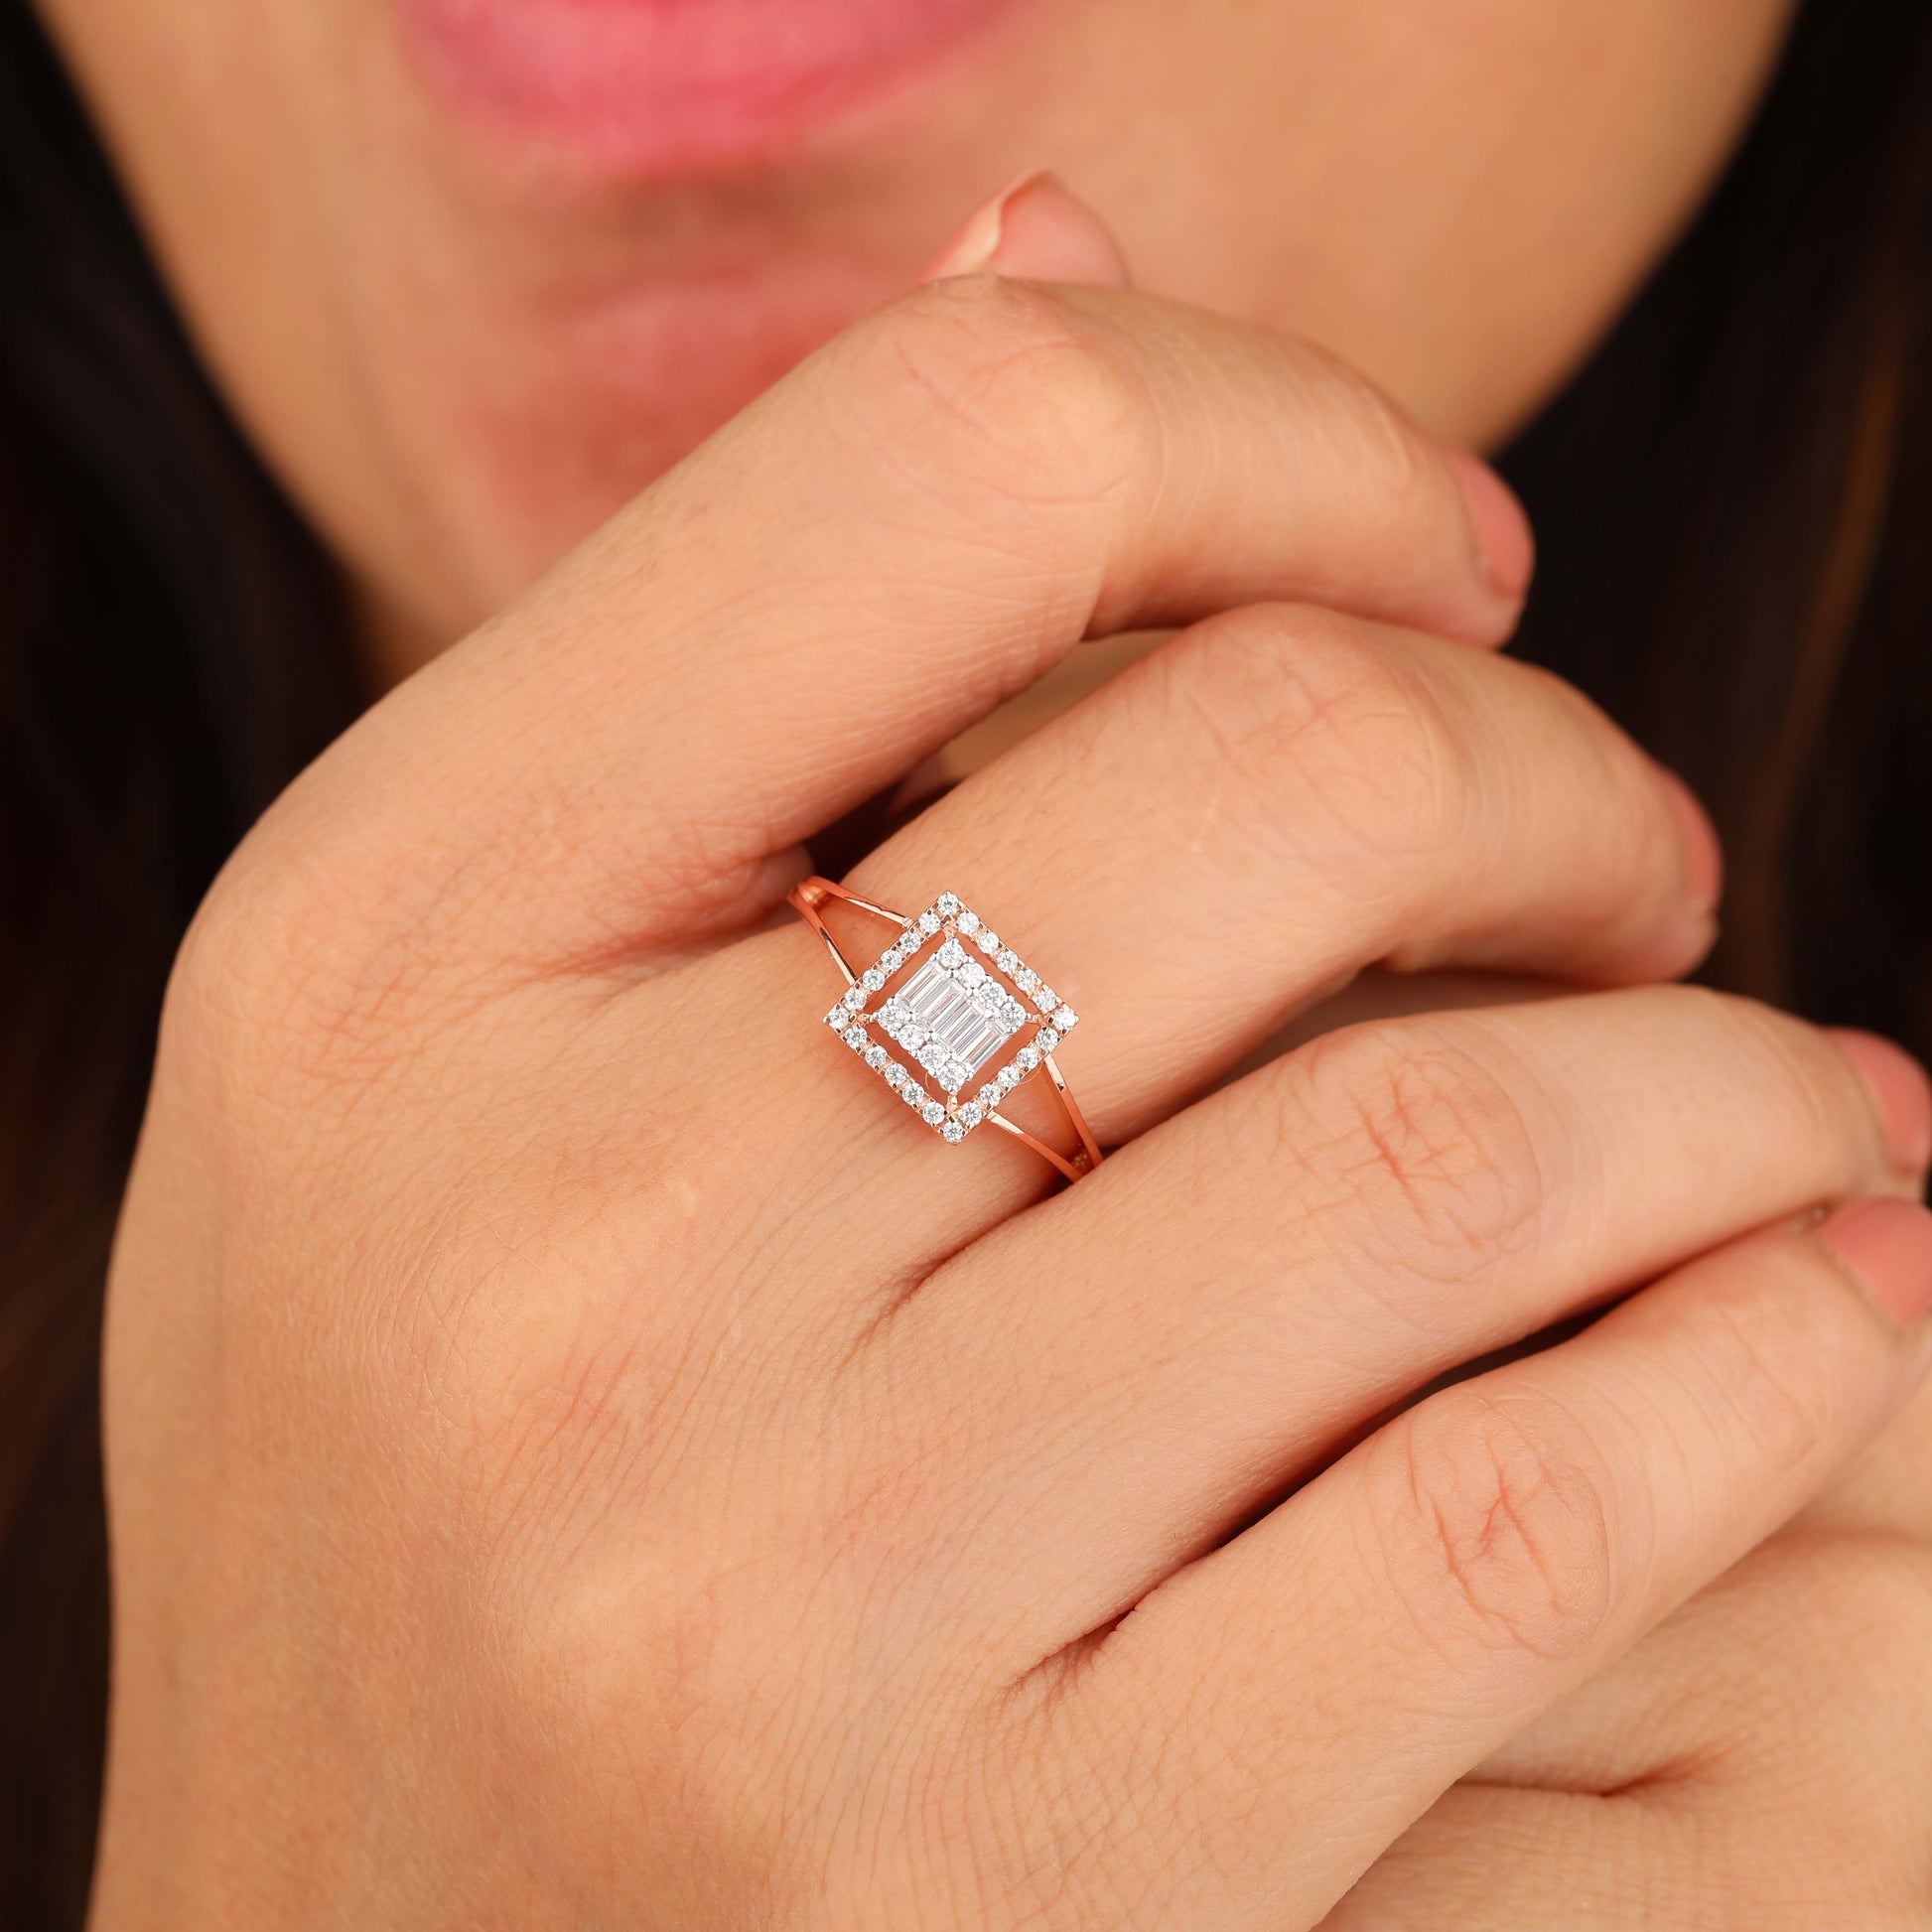 A person wearing Halo engagement Ring